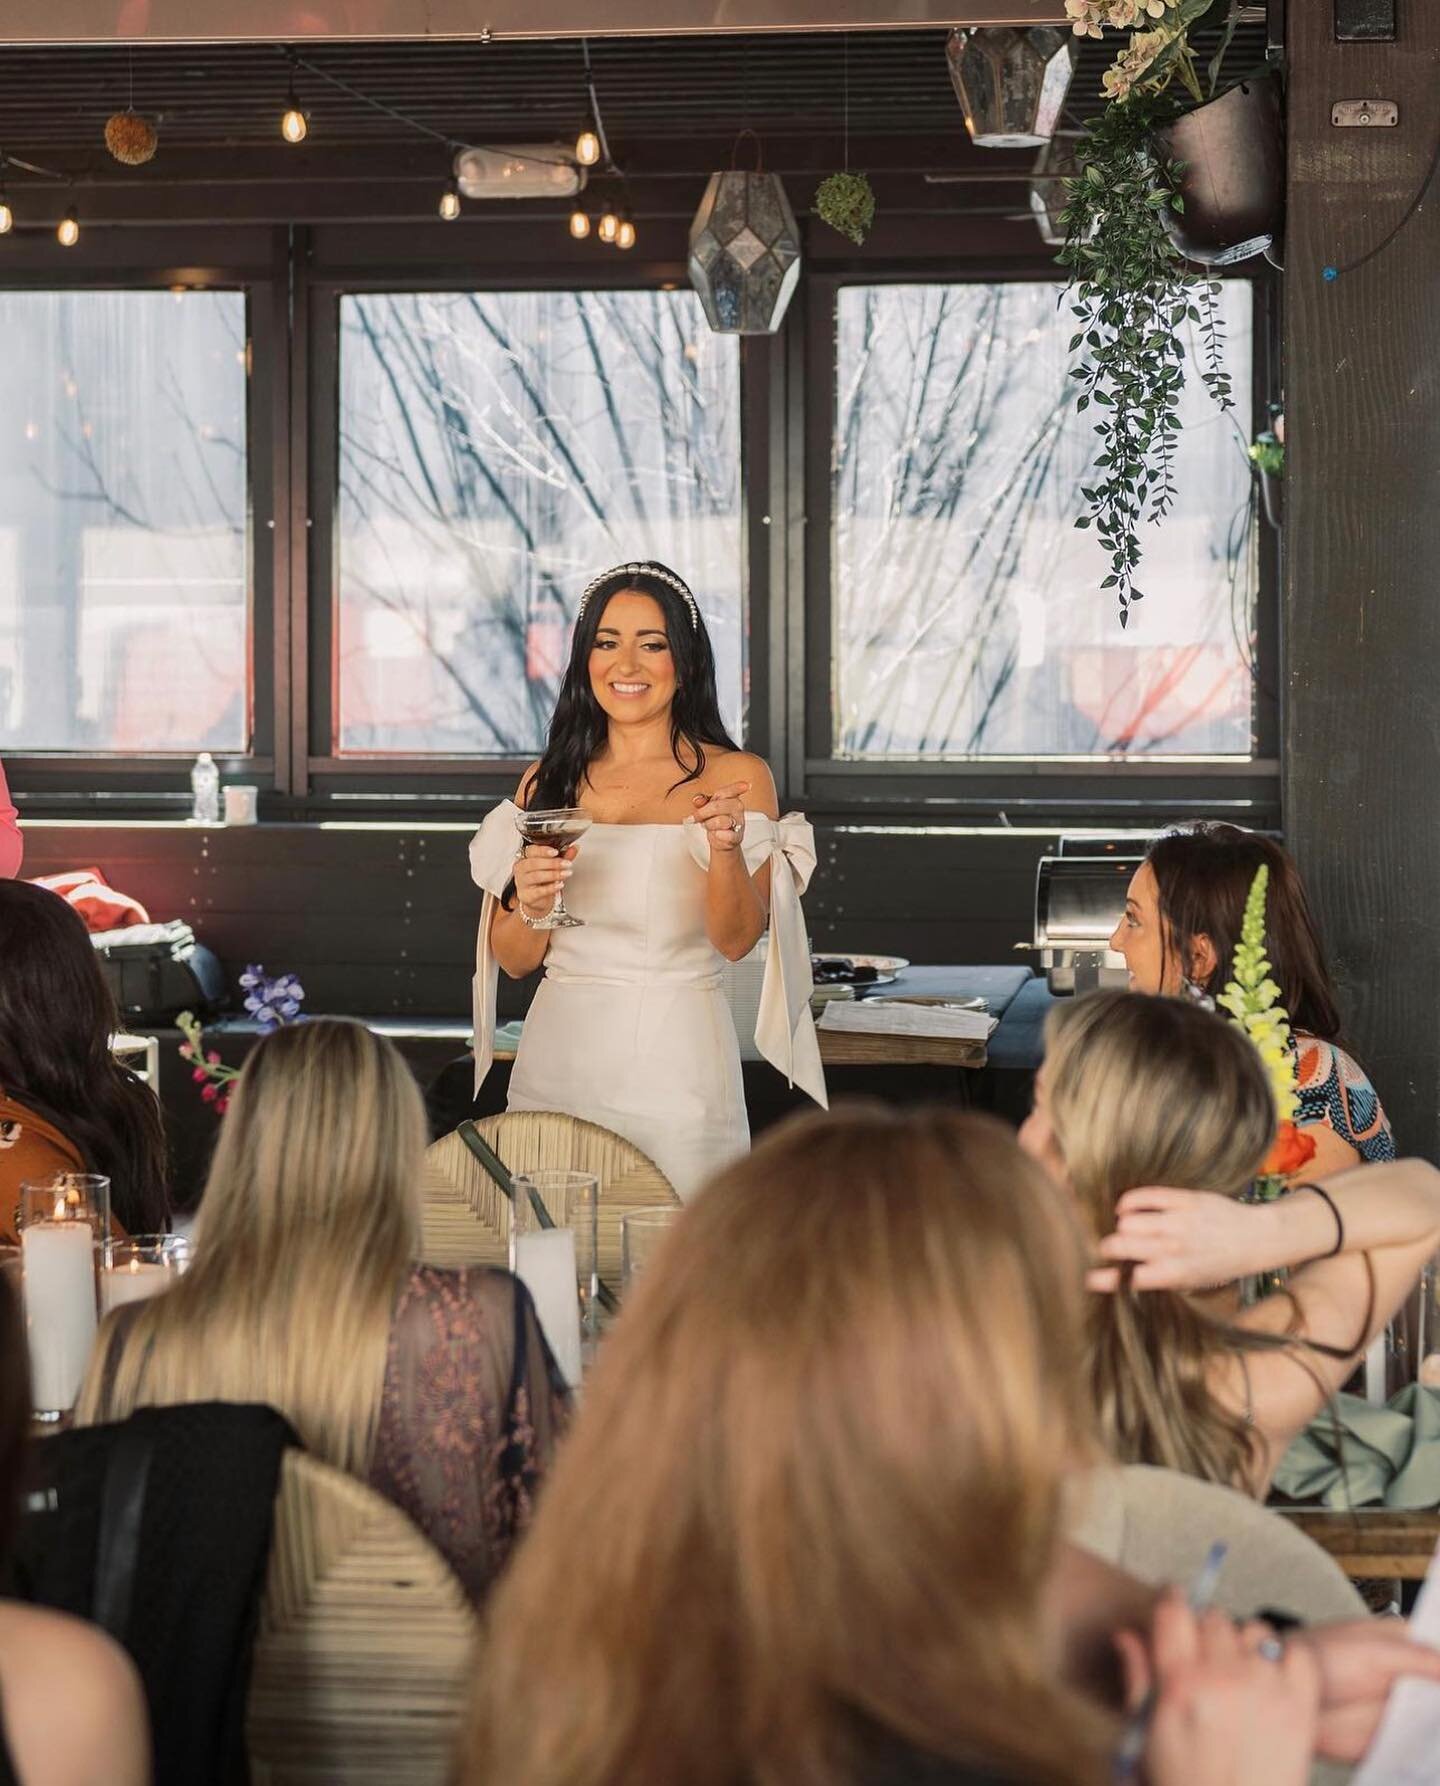 Memories are made each time you smell the fresh scent of flowers. Memories that fade, as you're swept up in a whirlwind of bliss.  Fortunately @grace.does.photos captured these amazing memories of @tanya_pec&rsquo;s bridal shower day. Thank you for s